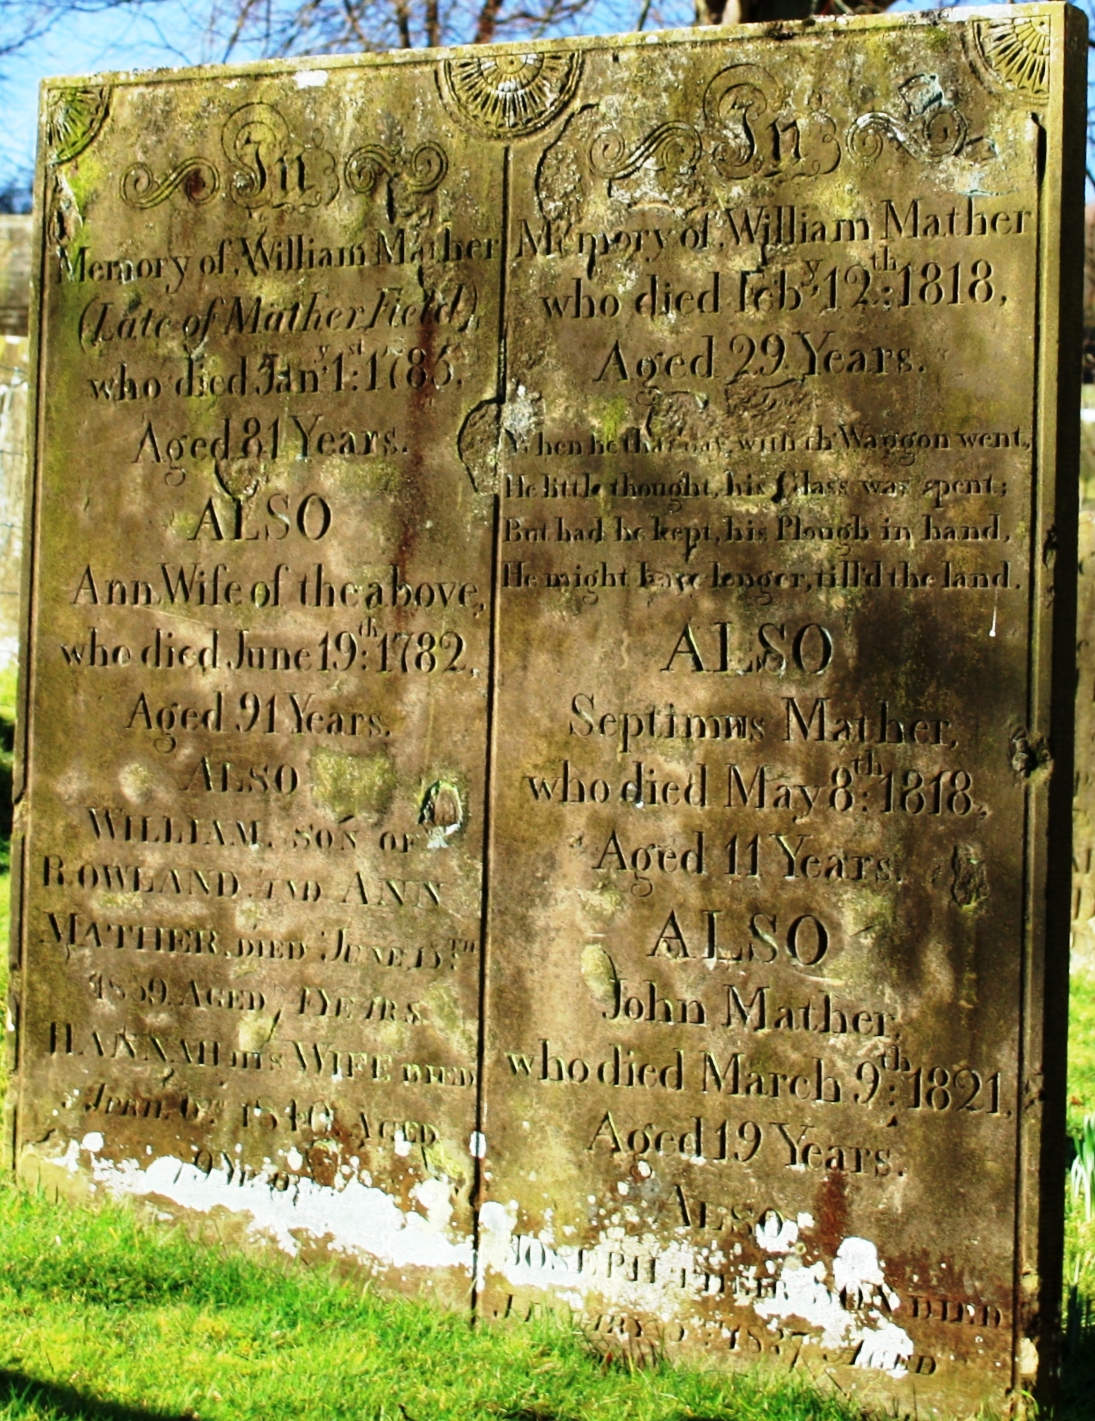 Taken in Edensor and sourced from FindAGrave.